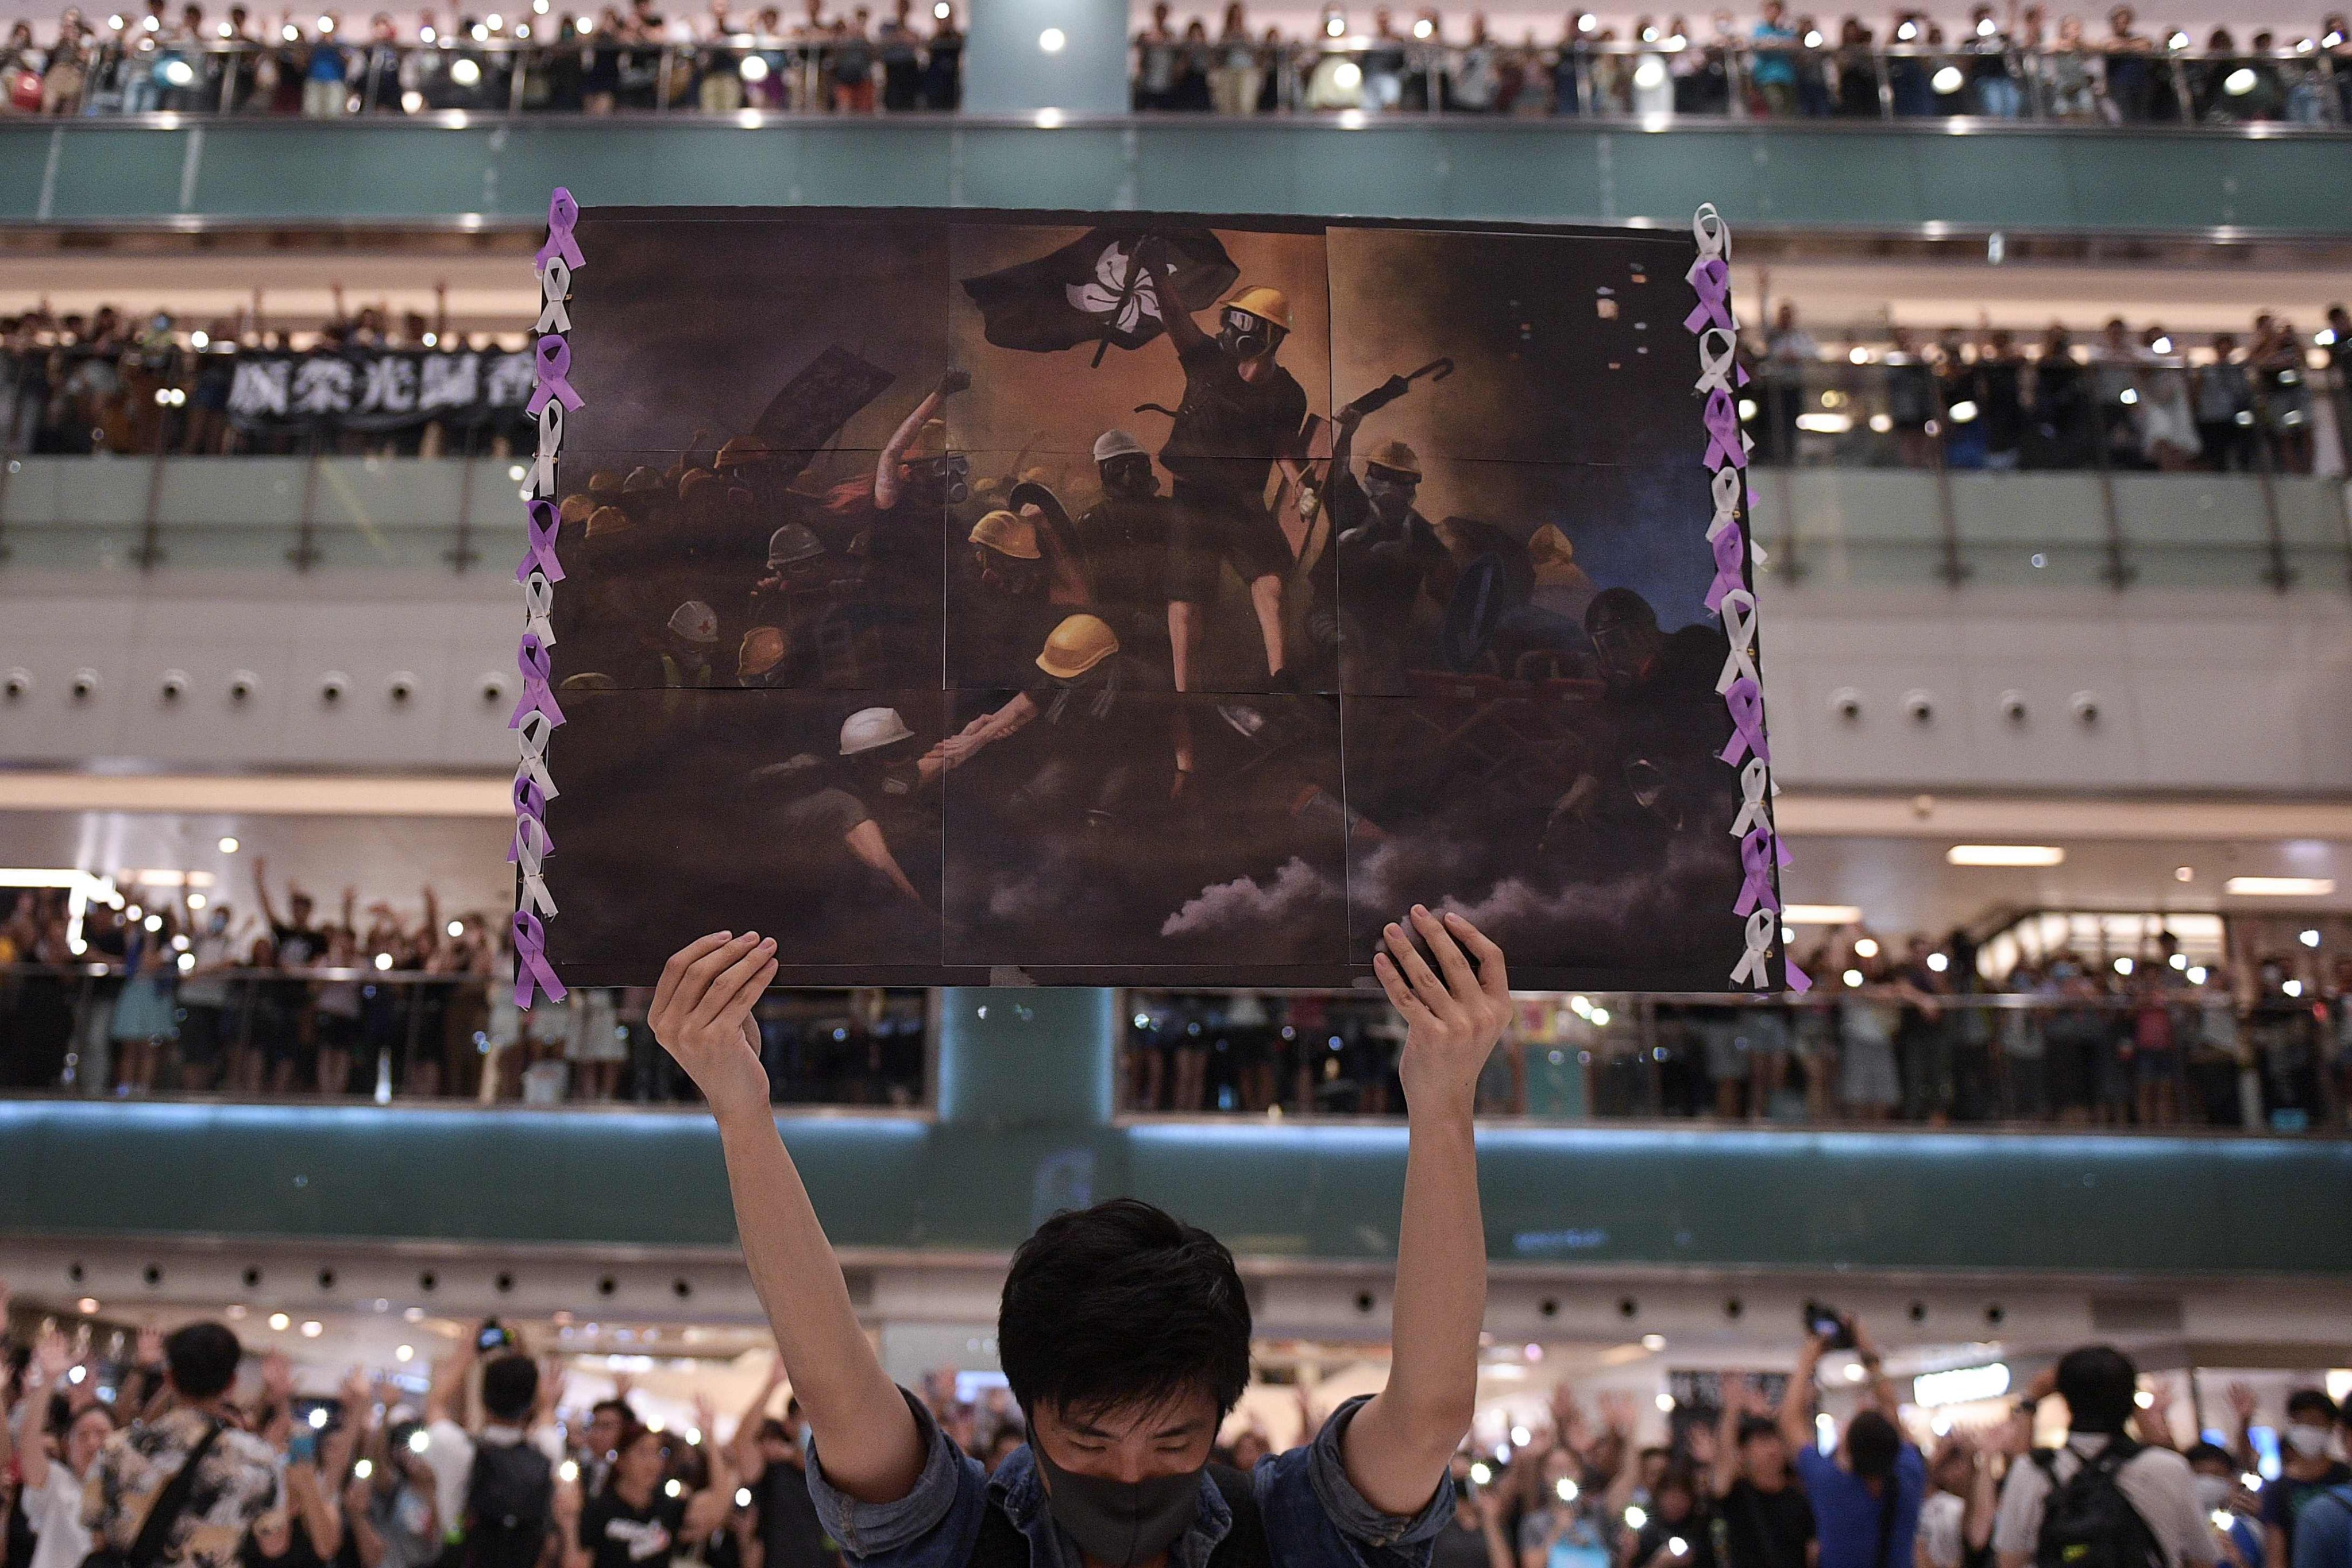 Hongkongers gather in a mall in September 2019 to hail the then newly penned protest song. Photo: AFP